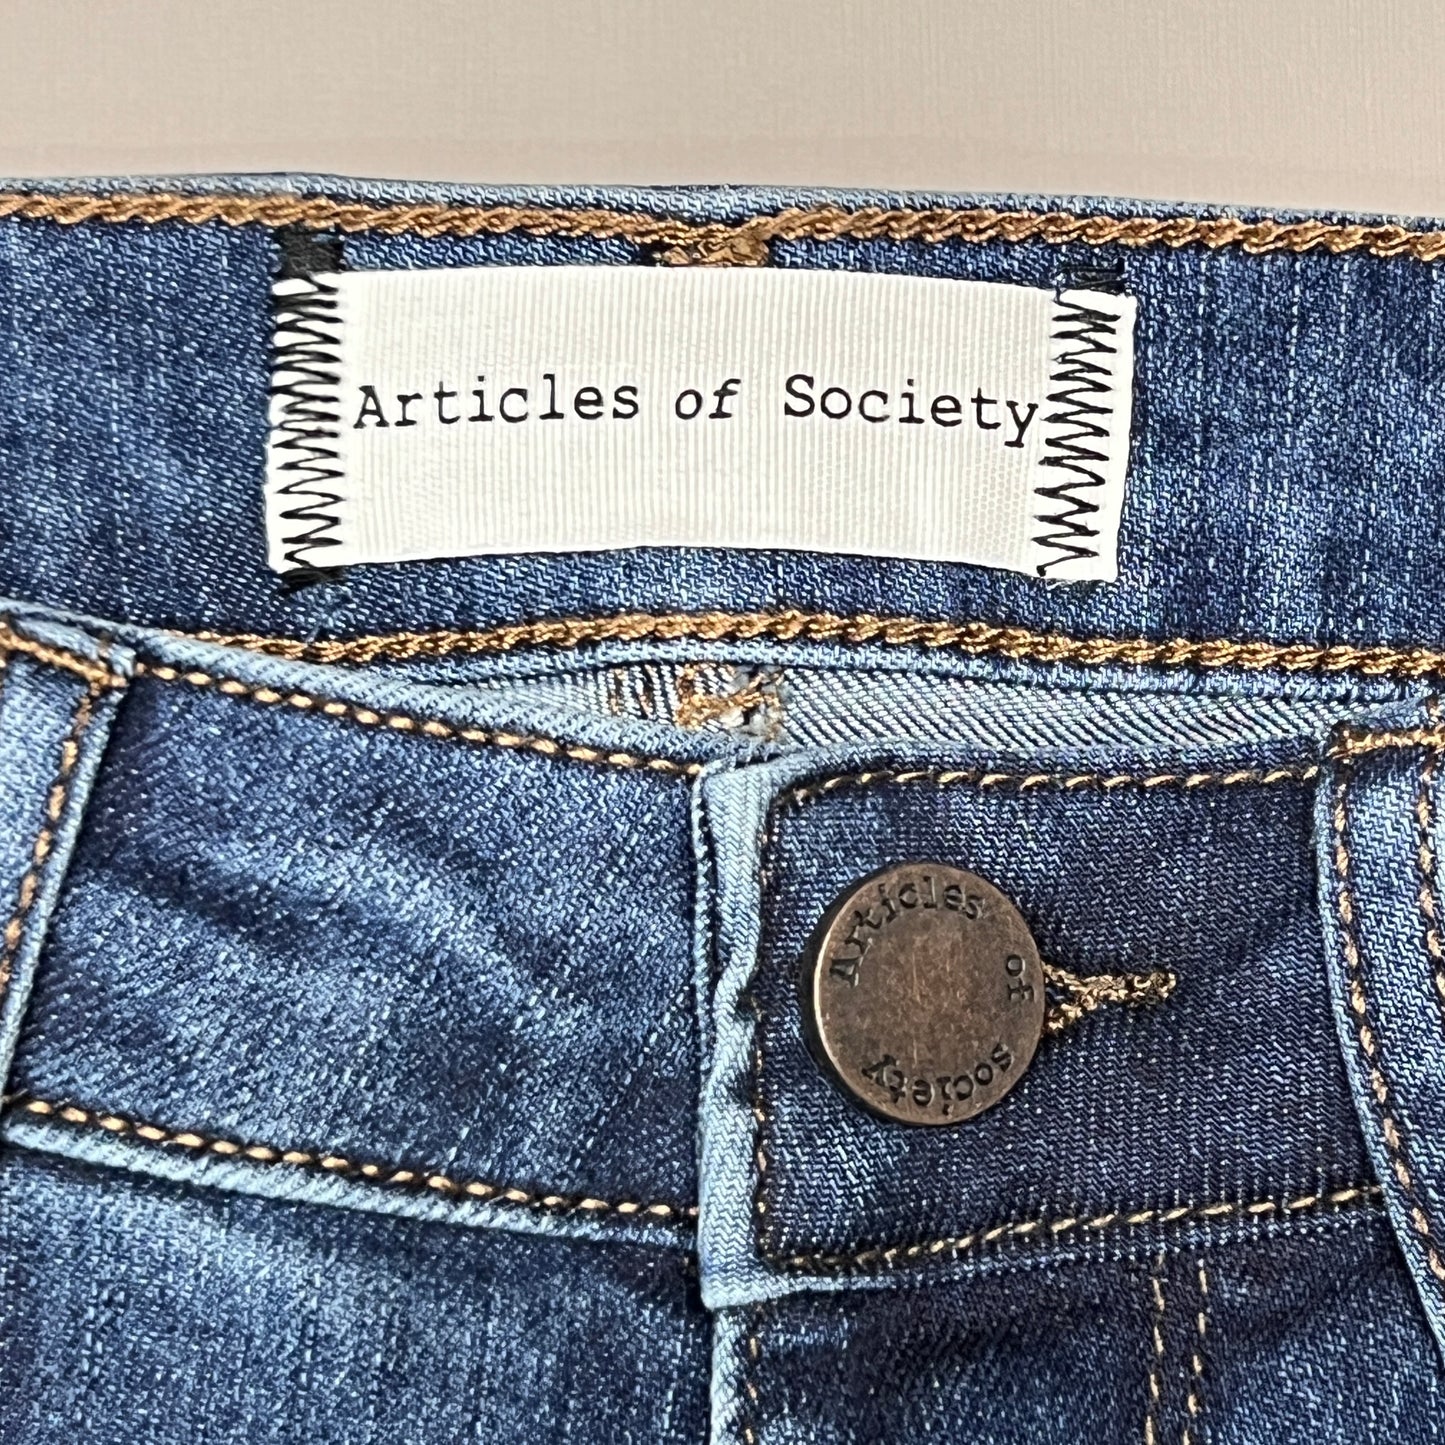 ARTICLES OF SOCIETY Hilo Ripped Denim Jeans Women's Sz 29 Blue 5350PLV-706 (New)